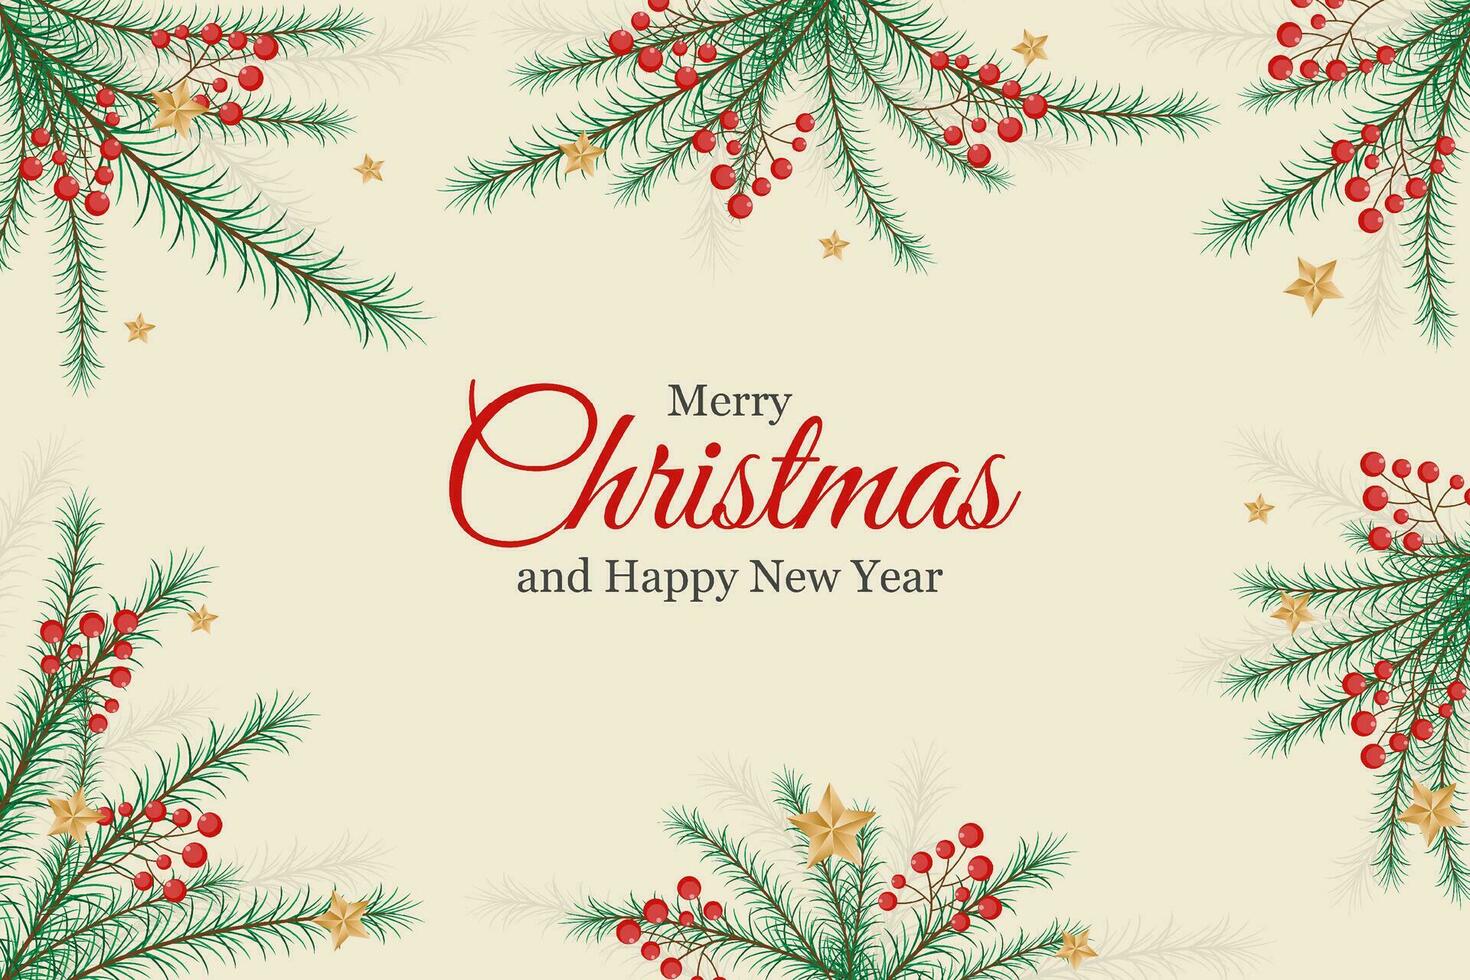 Merry Christmas background with pine leaf ornament vector